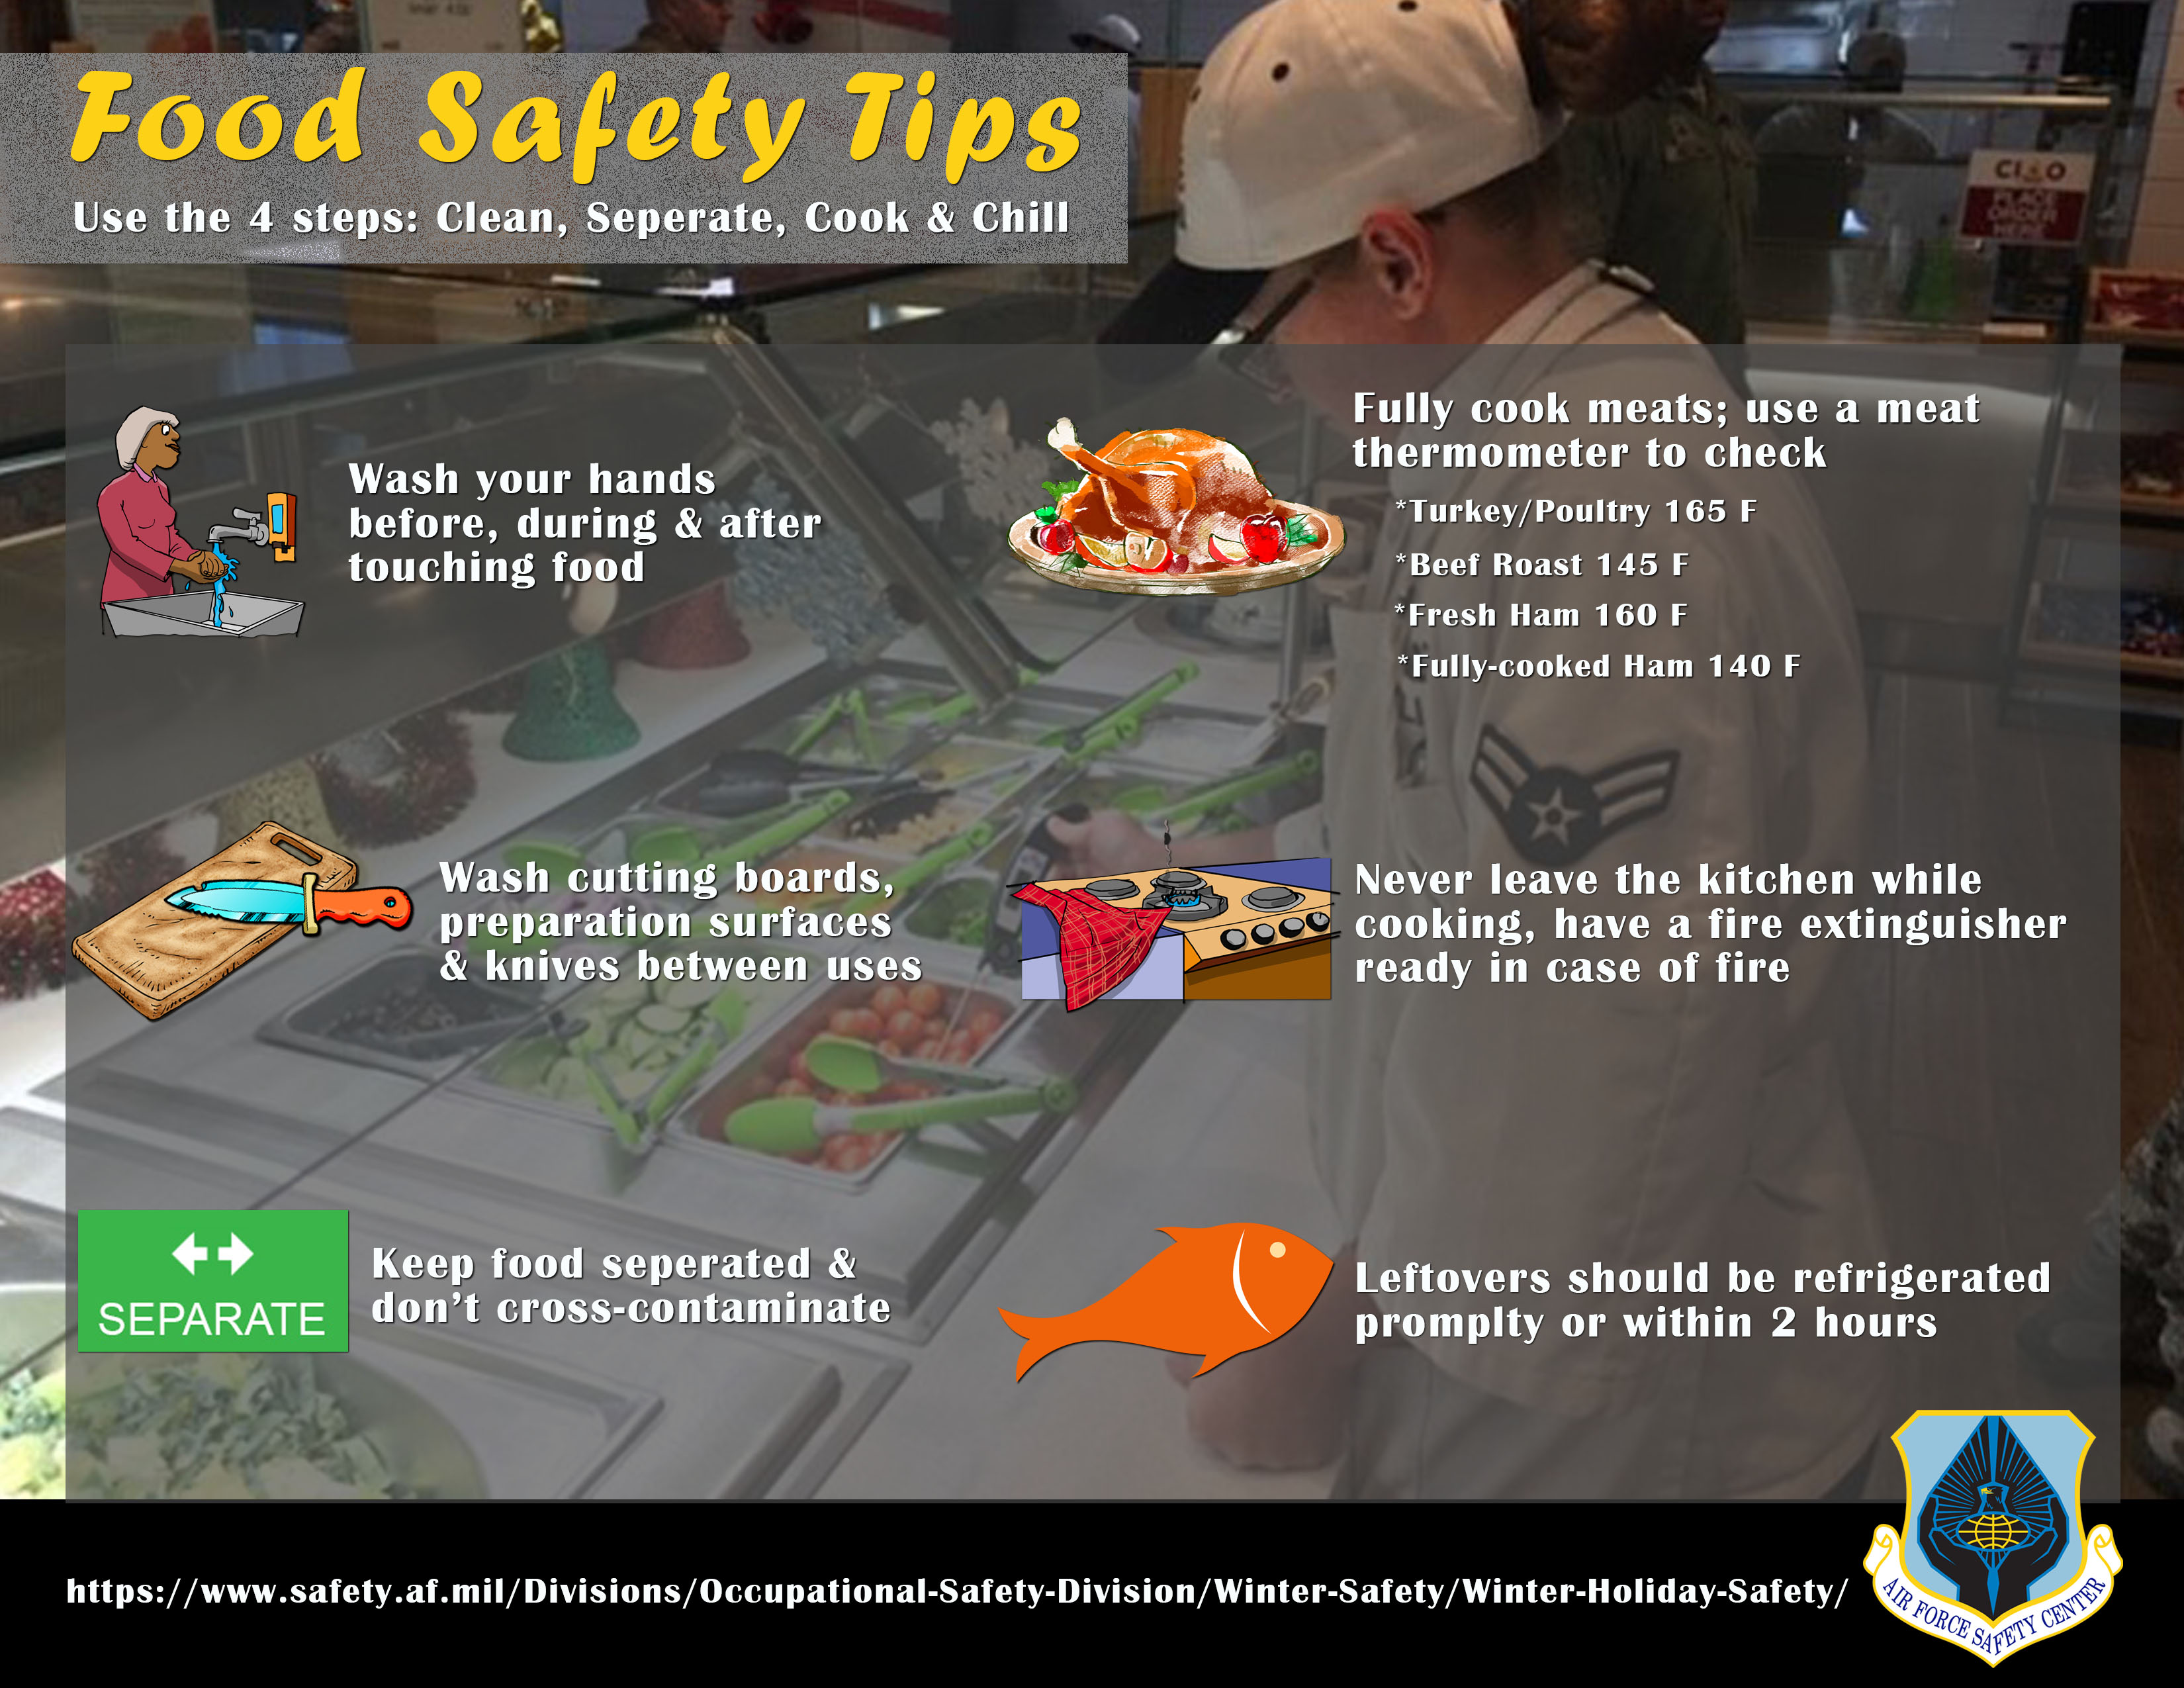 Food Safety Tips - Four Steps to food safety poster